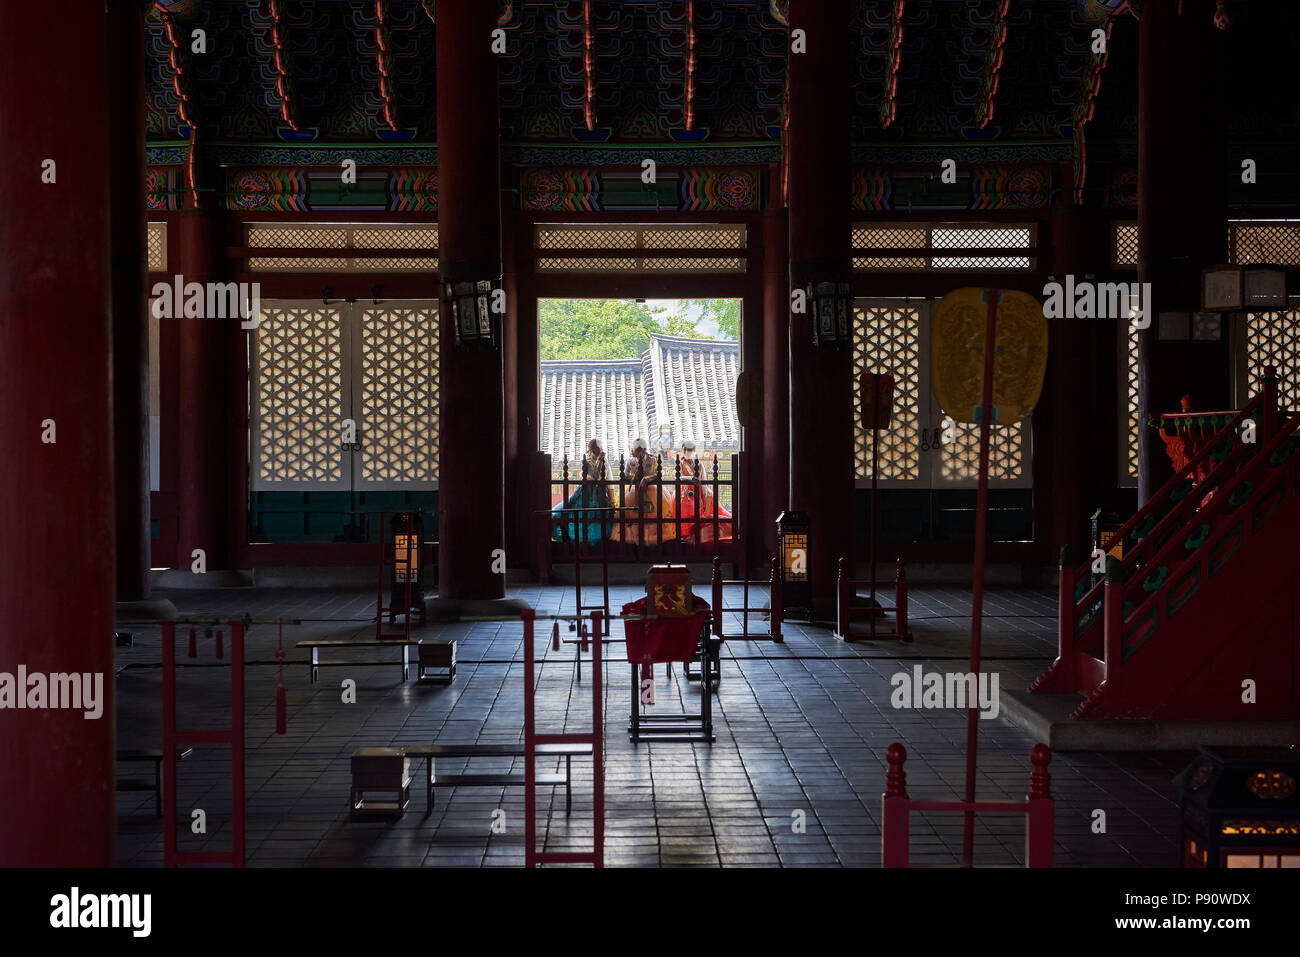 Three girls dressed in traditional Korean dresses are silhouetted at a window in the Throne Hall in Gyeongbokgung Palace, Seoul, South Korea. Stock Photo